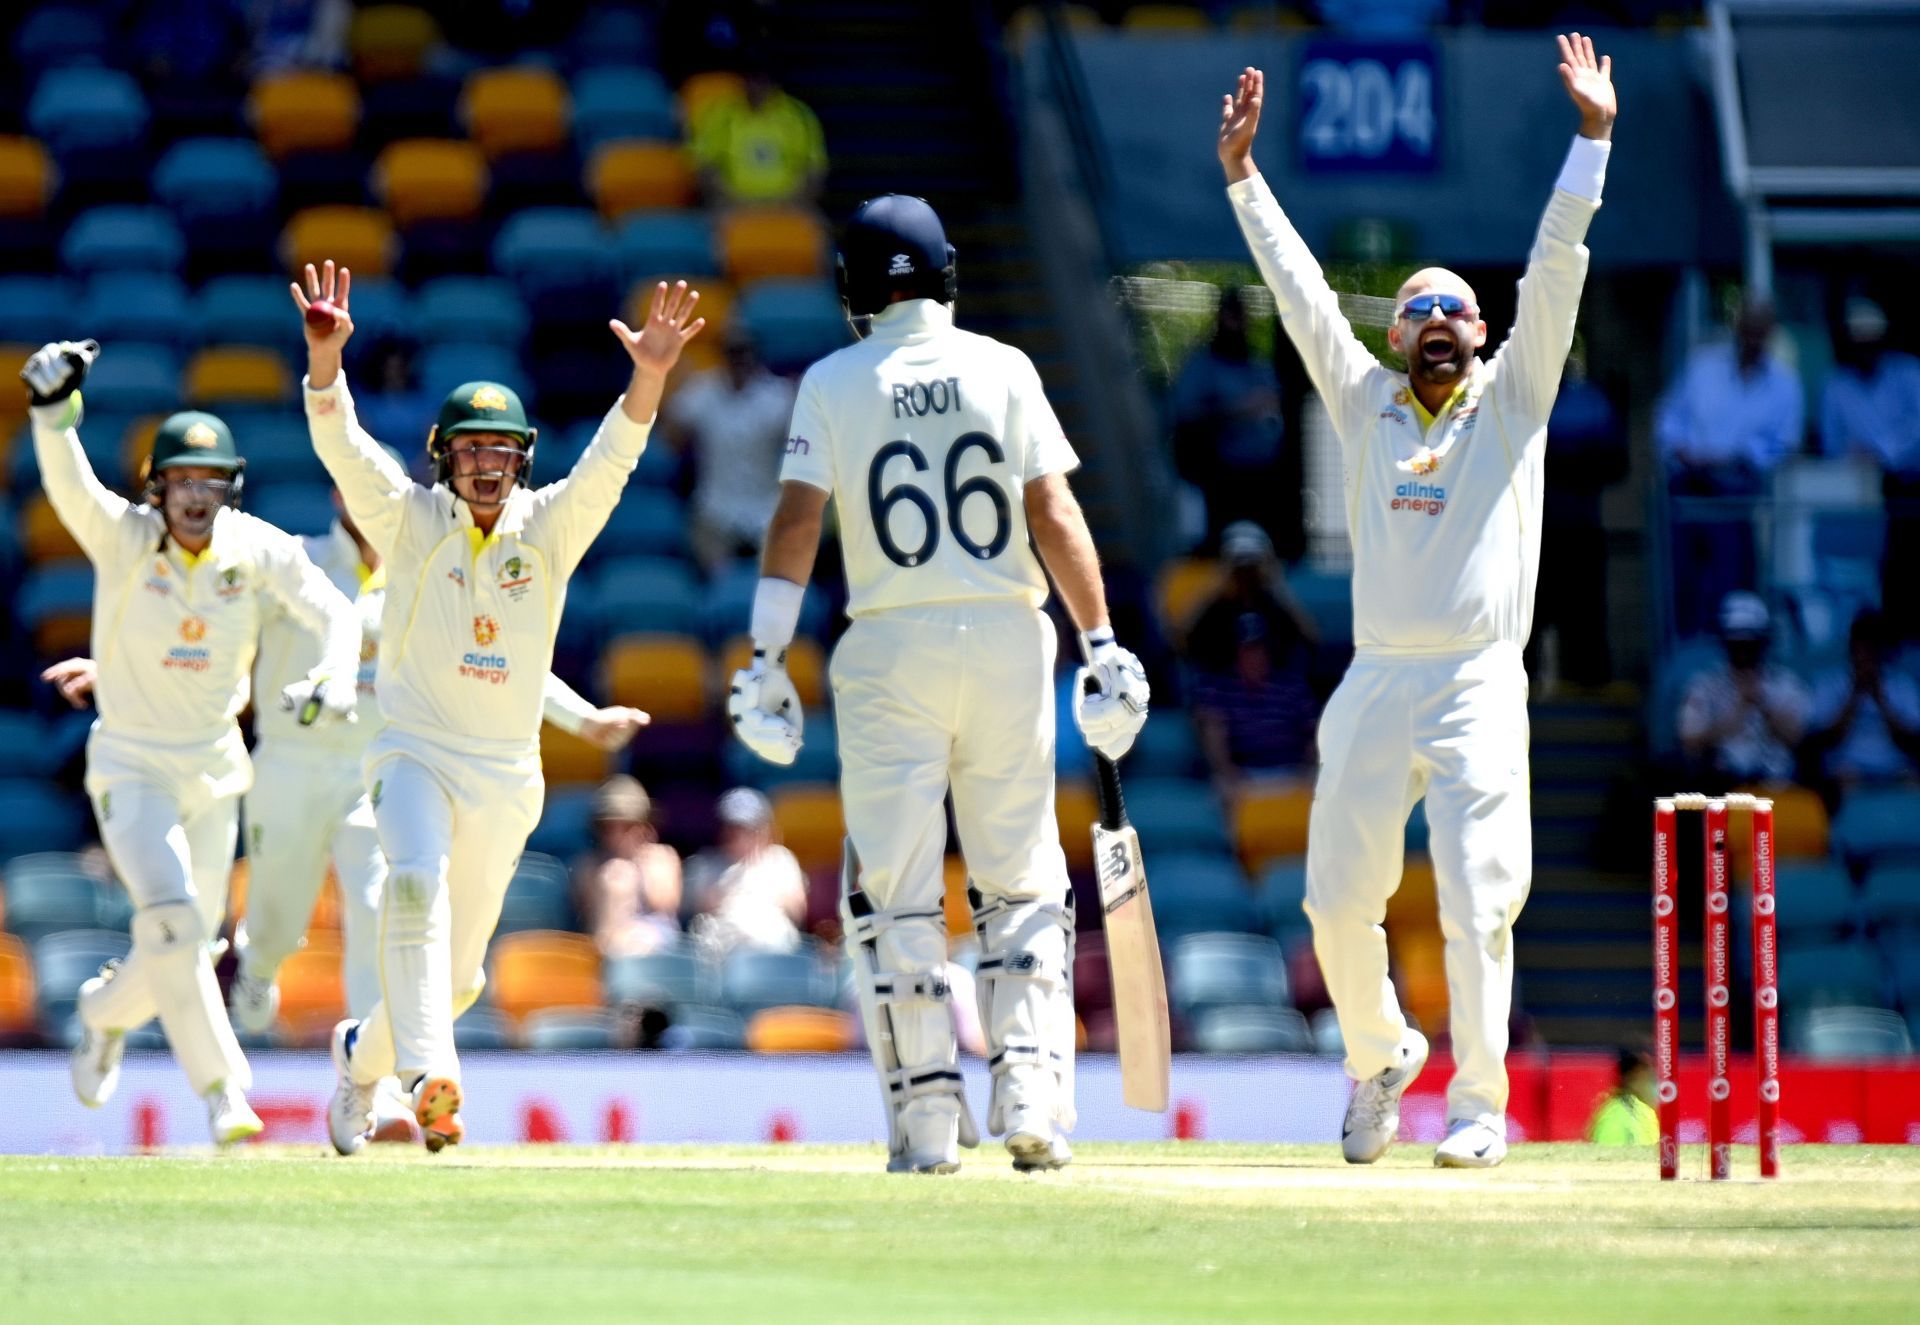 Nathan Lyon celebrates after taking his 400th test wicket after dismissing Dawid Malan of England for 82. Pic: Getty Images